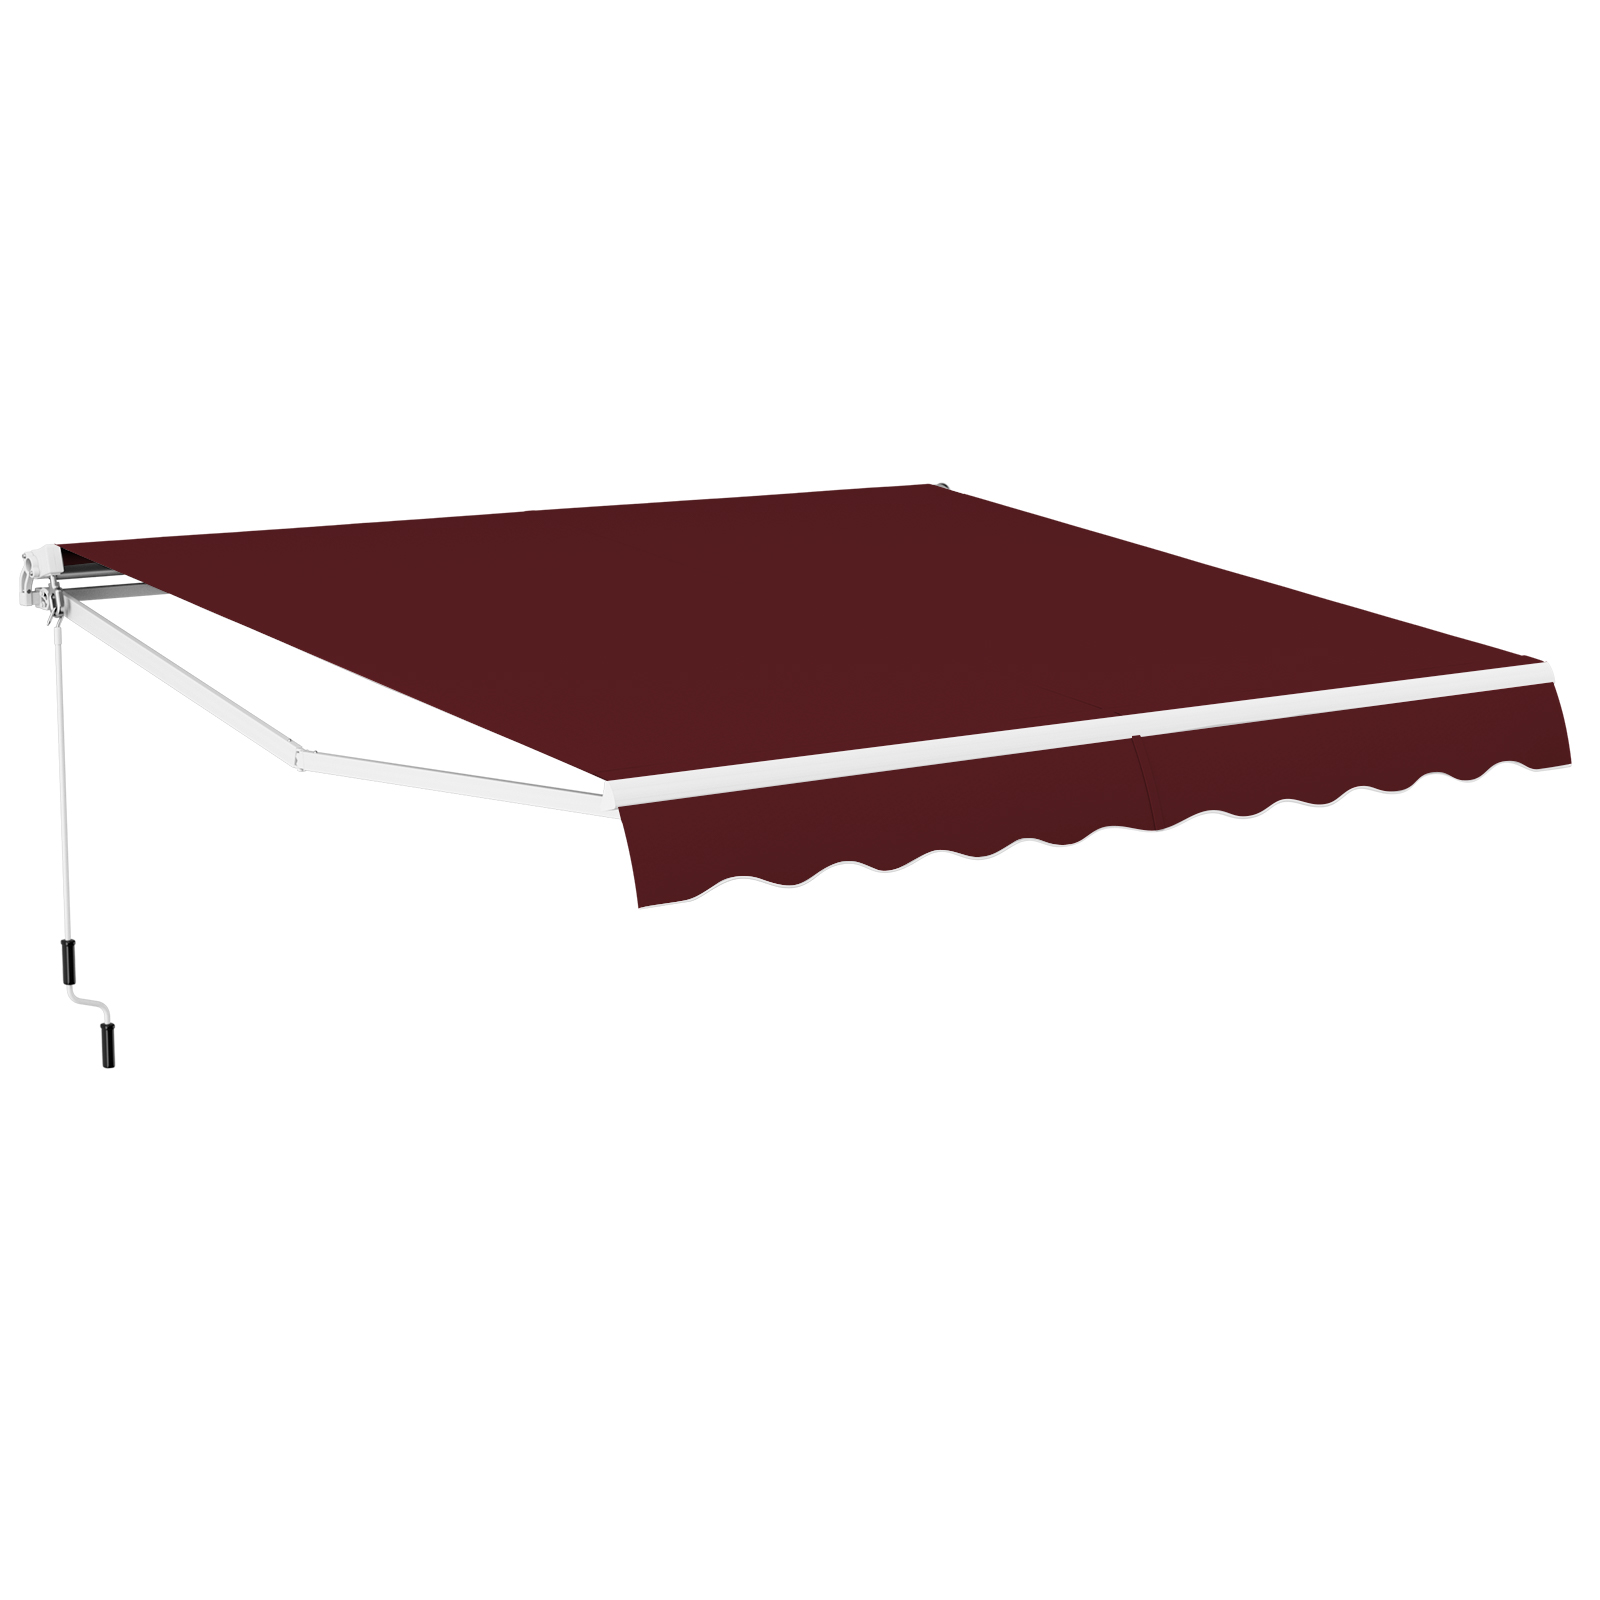 Patio_Retractable_Awning_with_Manual_Crank_Handle_Wine-3.jpg